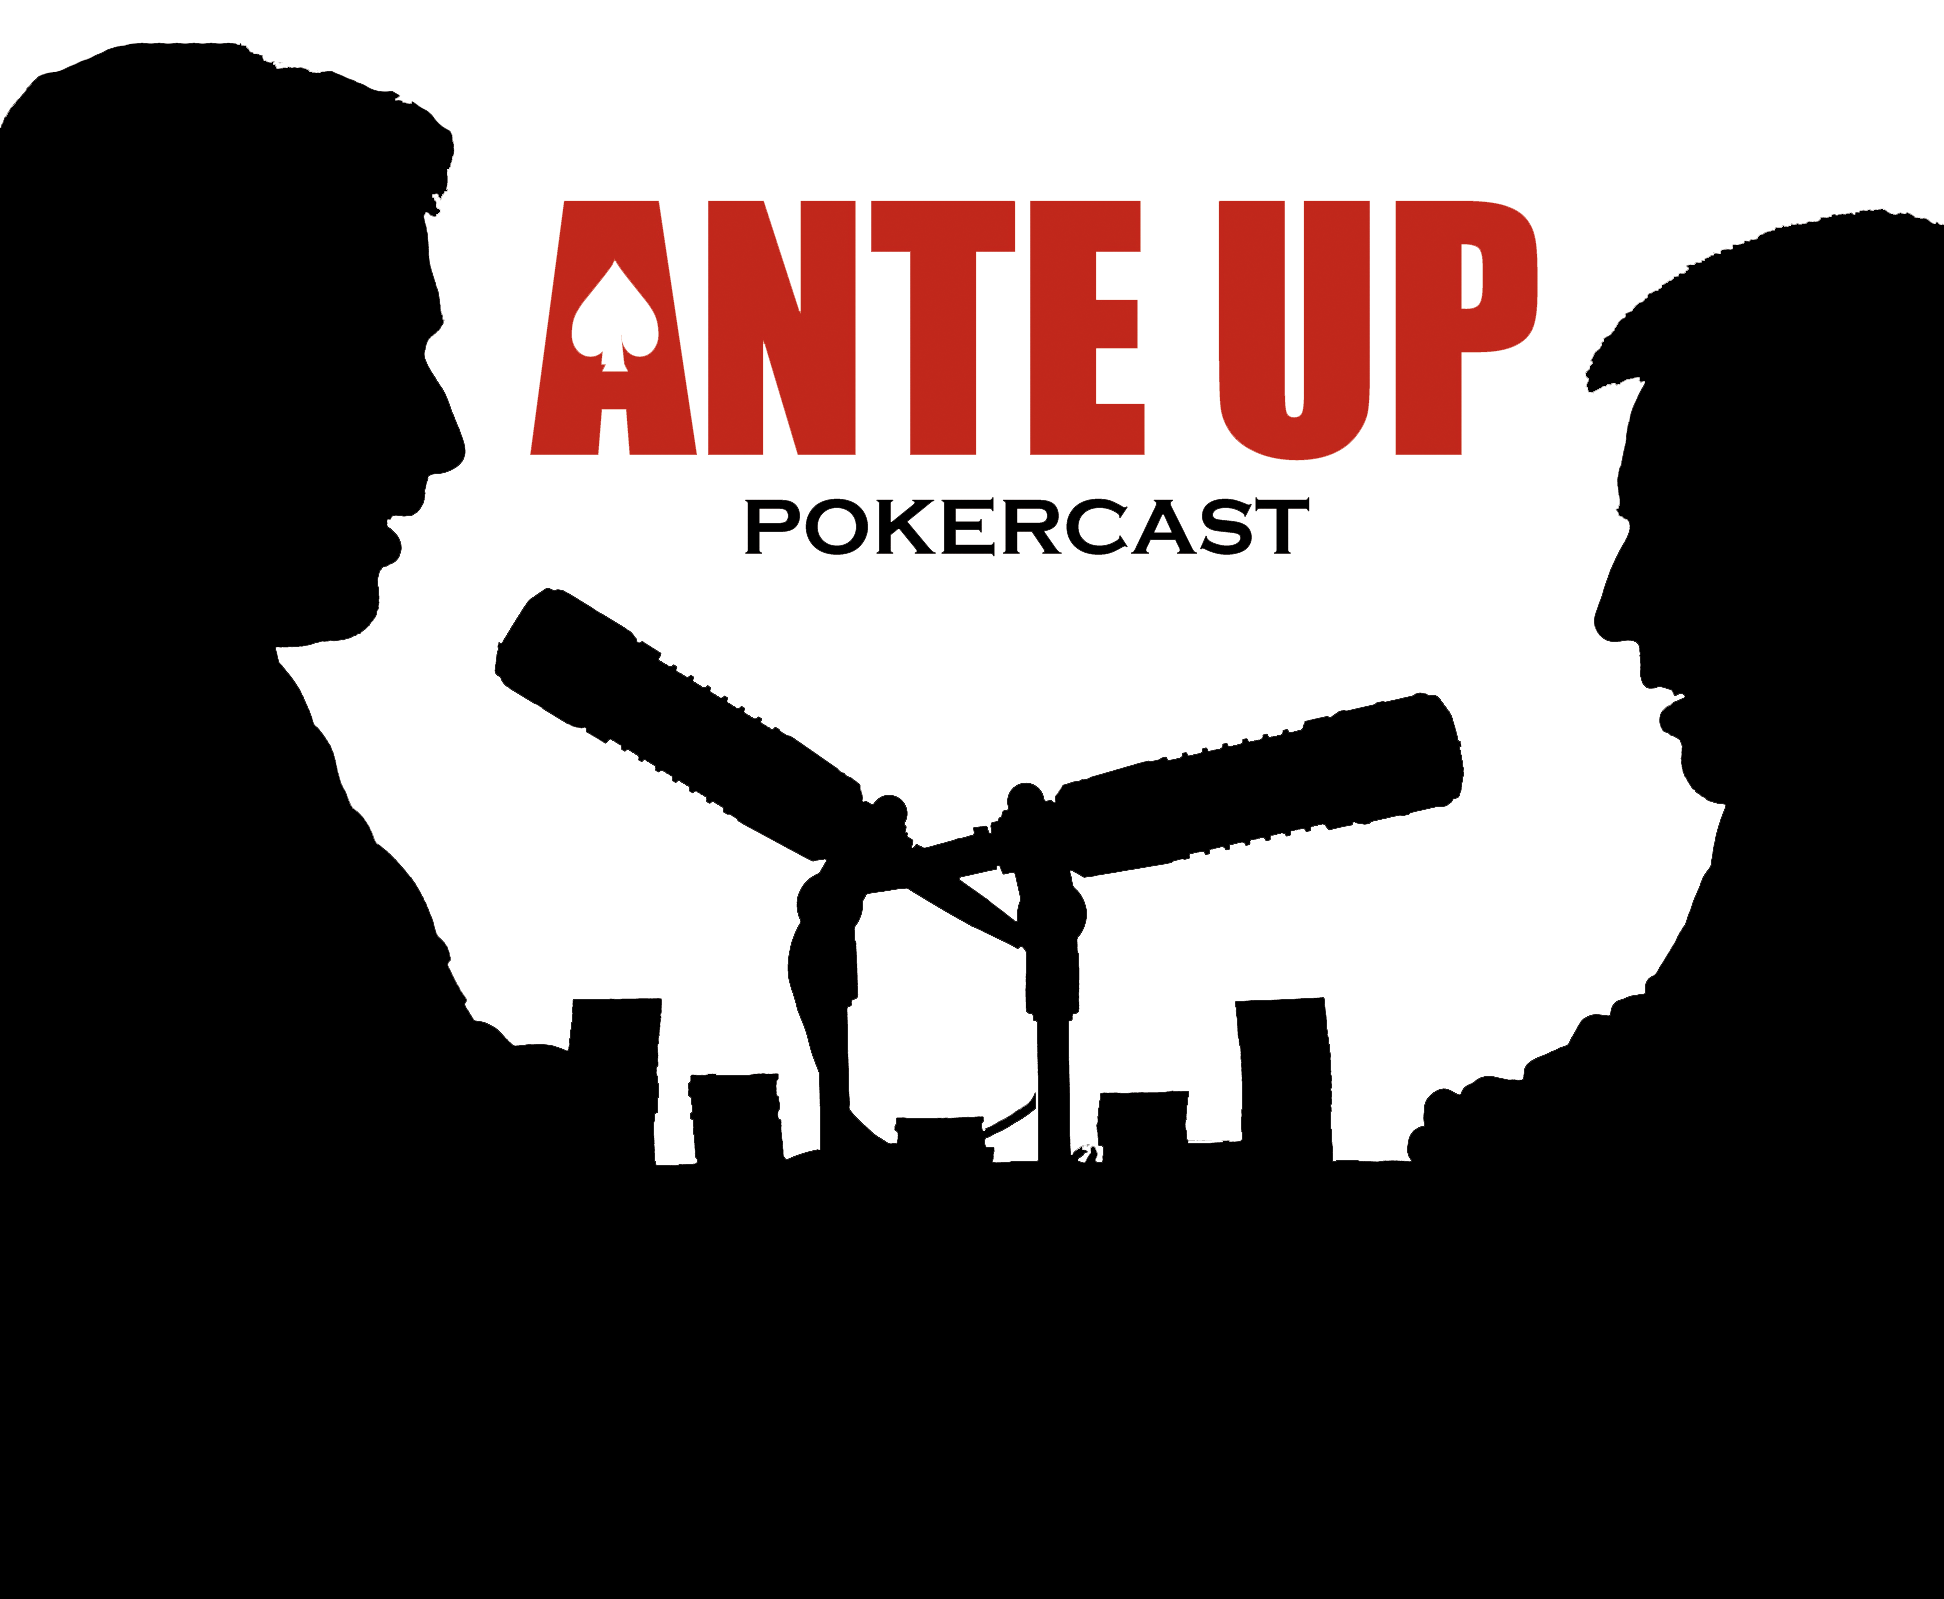 Poker’s Longest-Working Podcast, Ante Up Poker Forged, Comes to an Conclude